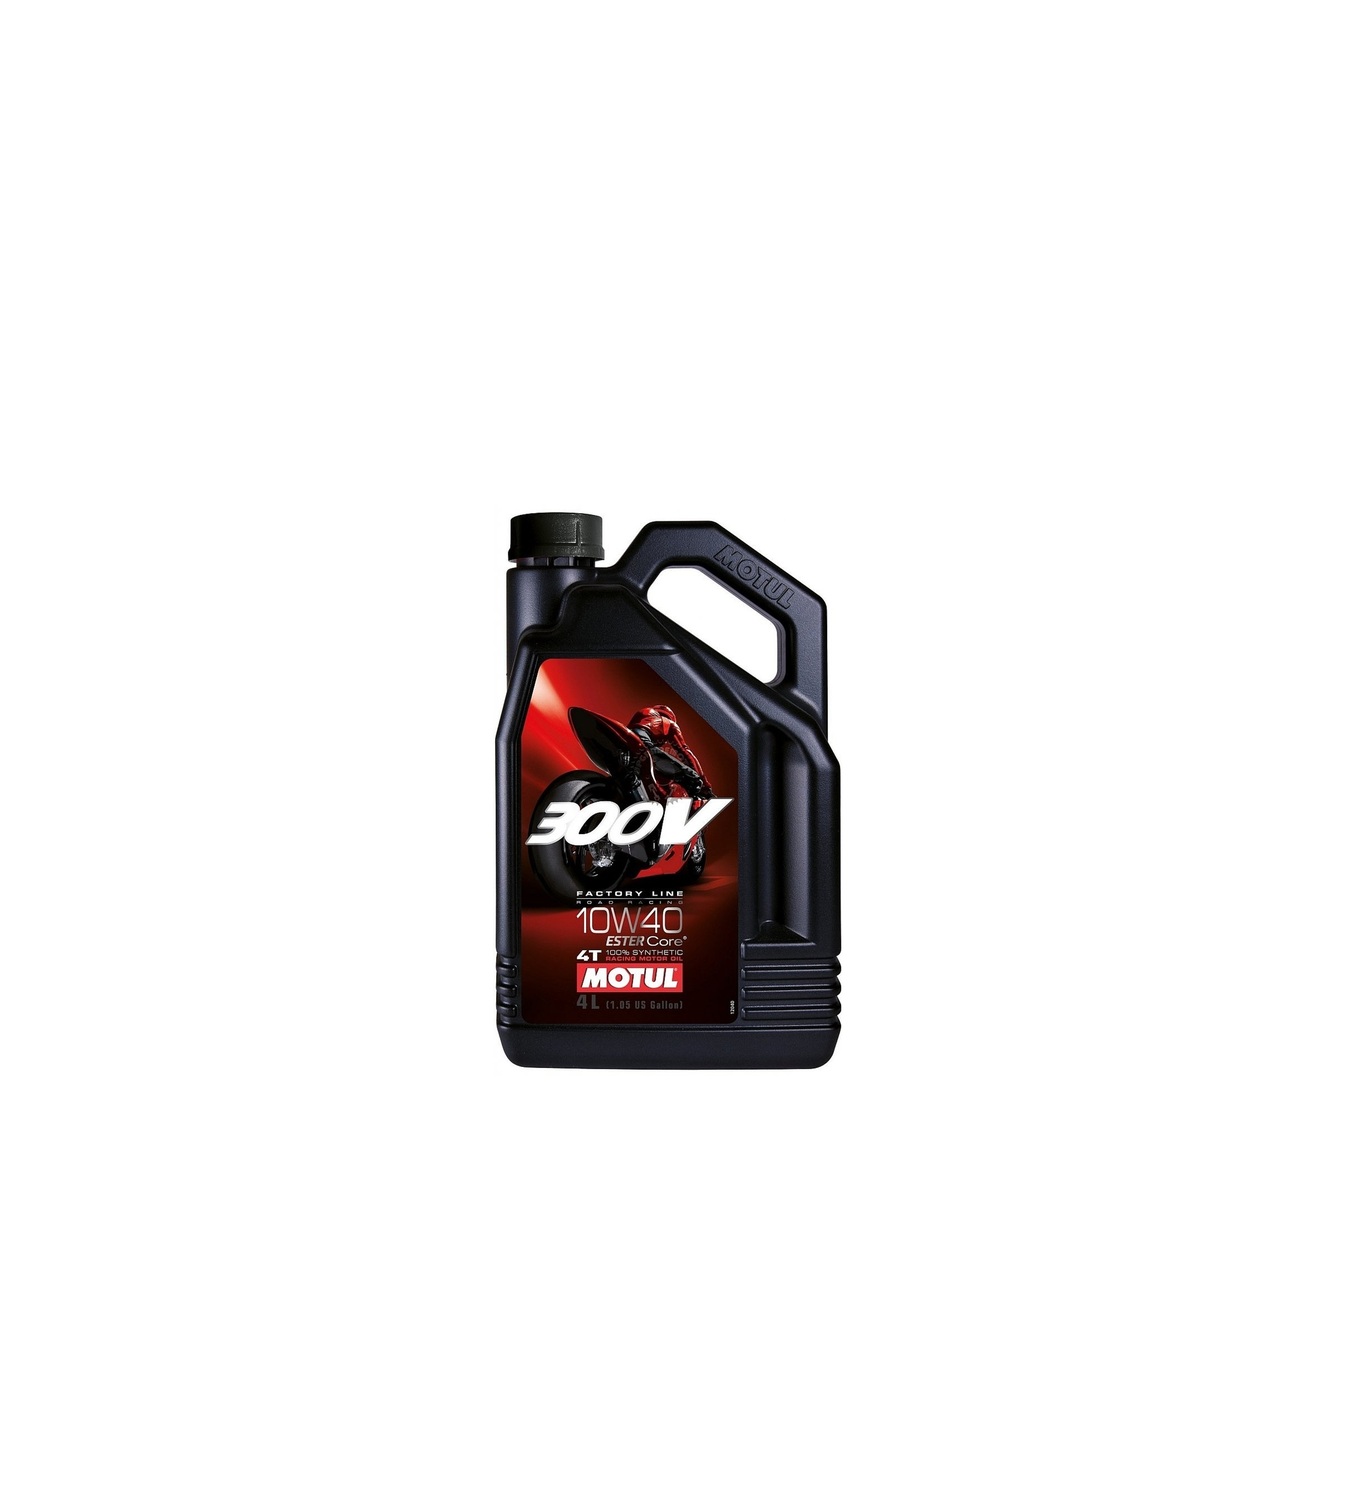 <span style="font-weight: bold;">Масло моторное MOTUL 300V 10W-40 4Т, 4 л.</span>&nbsp;